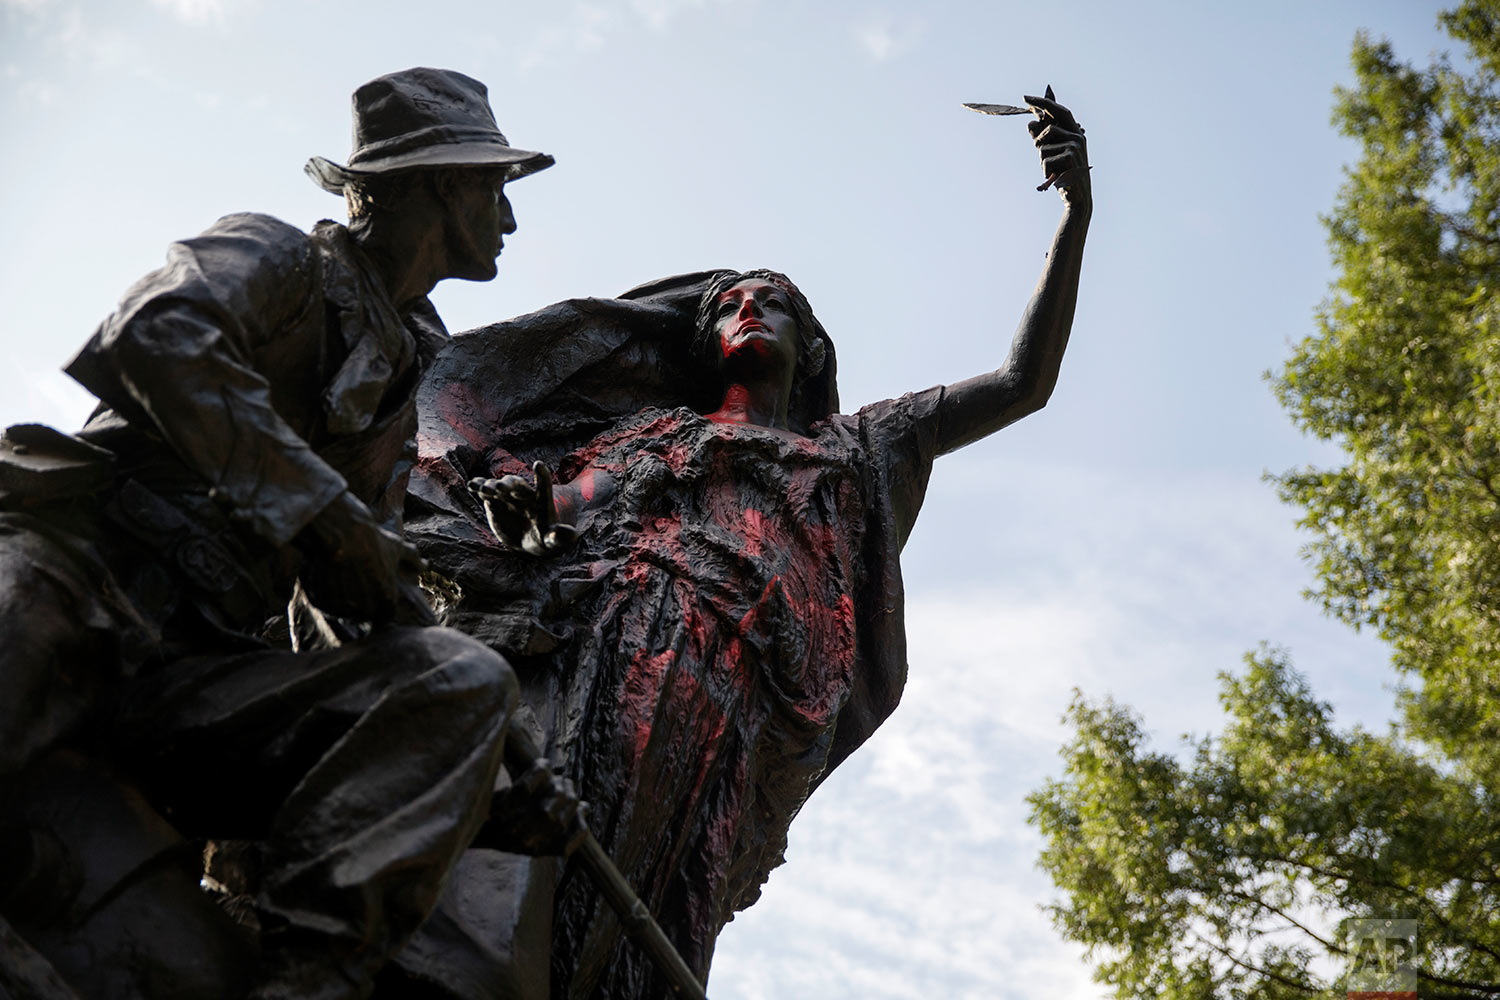  A statue depicting a Confederate soldier in Piedmont Park in Atlanta is vandalized with spray paint Monday, Aug. 14, 2017, from protesters who marched through the city last night to protest the weekend violence in Charlottesville, Virginia. (AP Phot